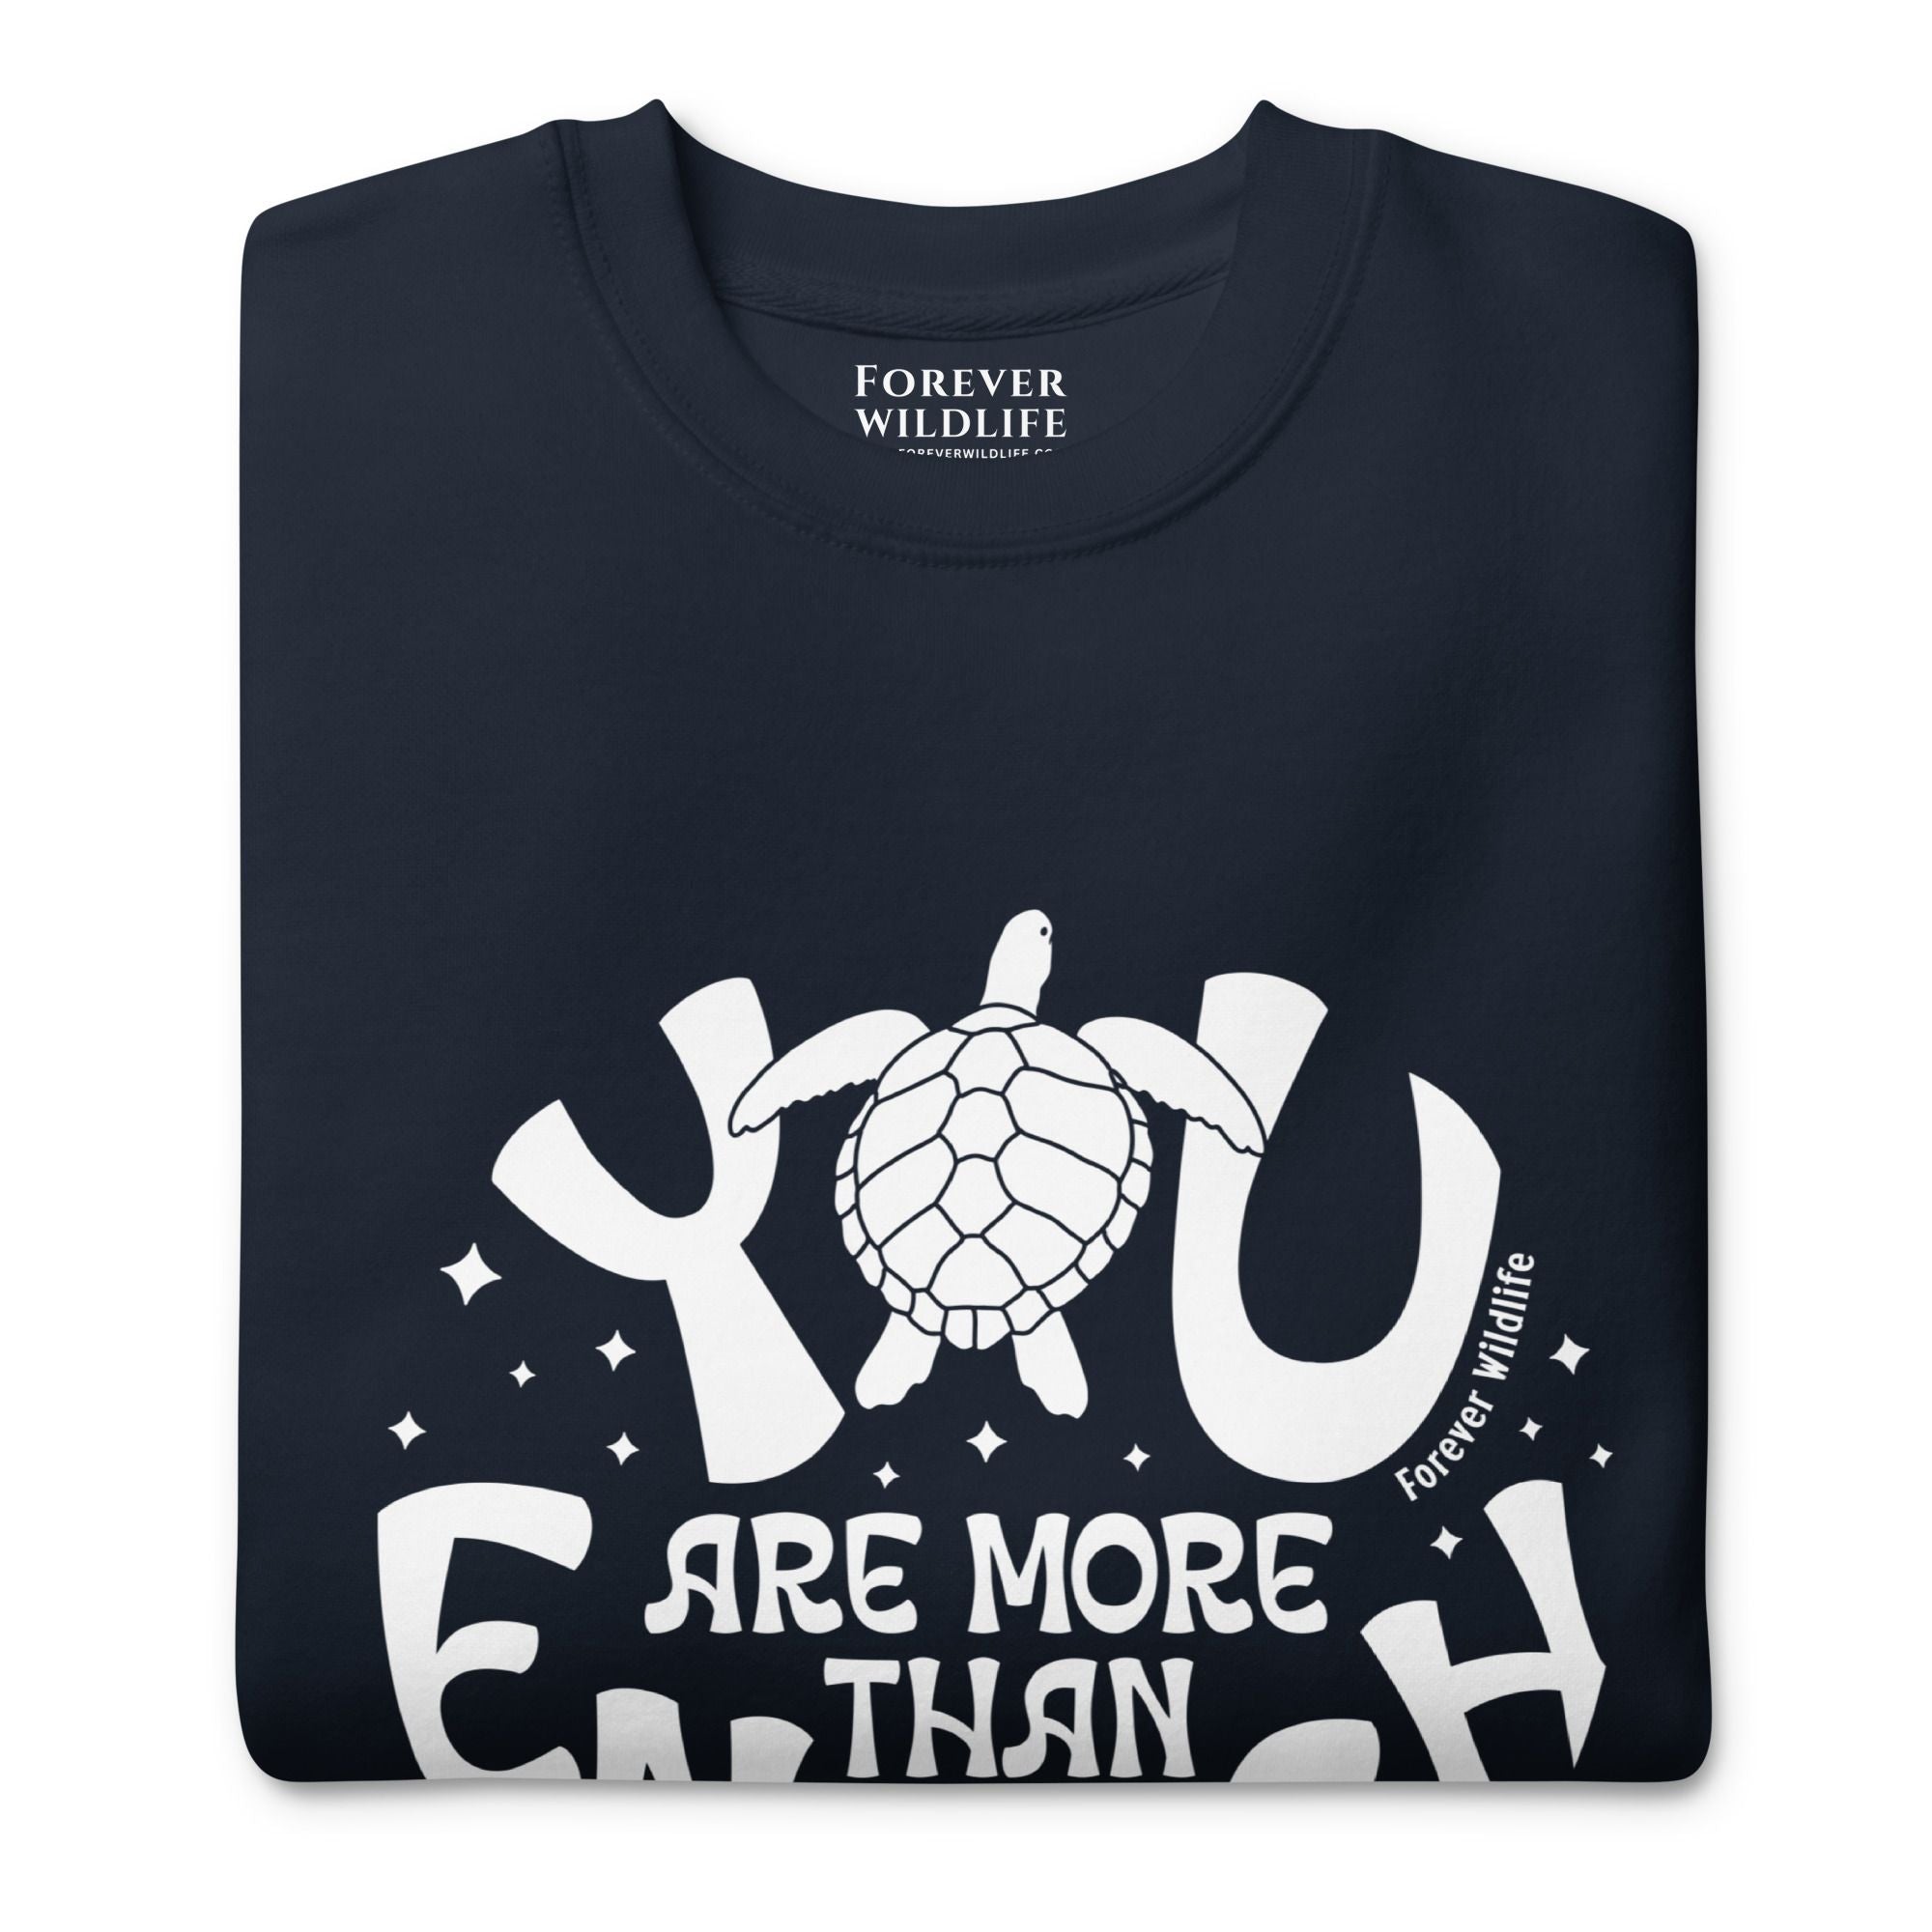 Sea Turtle Sweatshirt in Navy-Premium Wildlife Animal Inspiration Sweatshirt Design with 'You Are More Than Enough' text, part of Wildlife Sweatshirts & Clothing from Forever Wildlife.